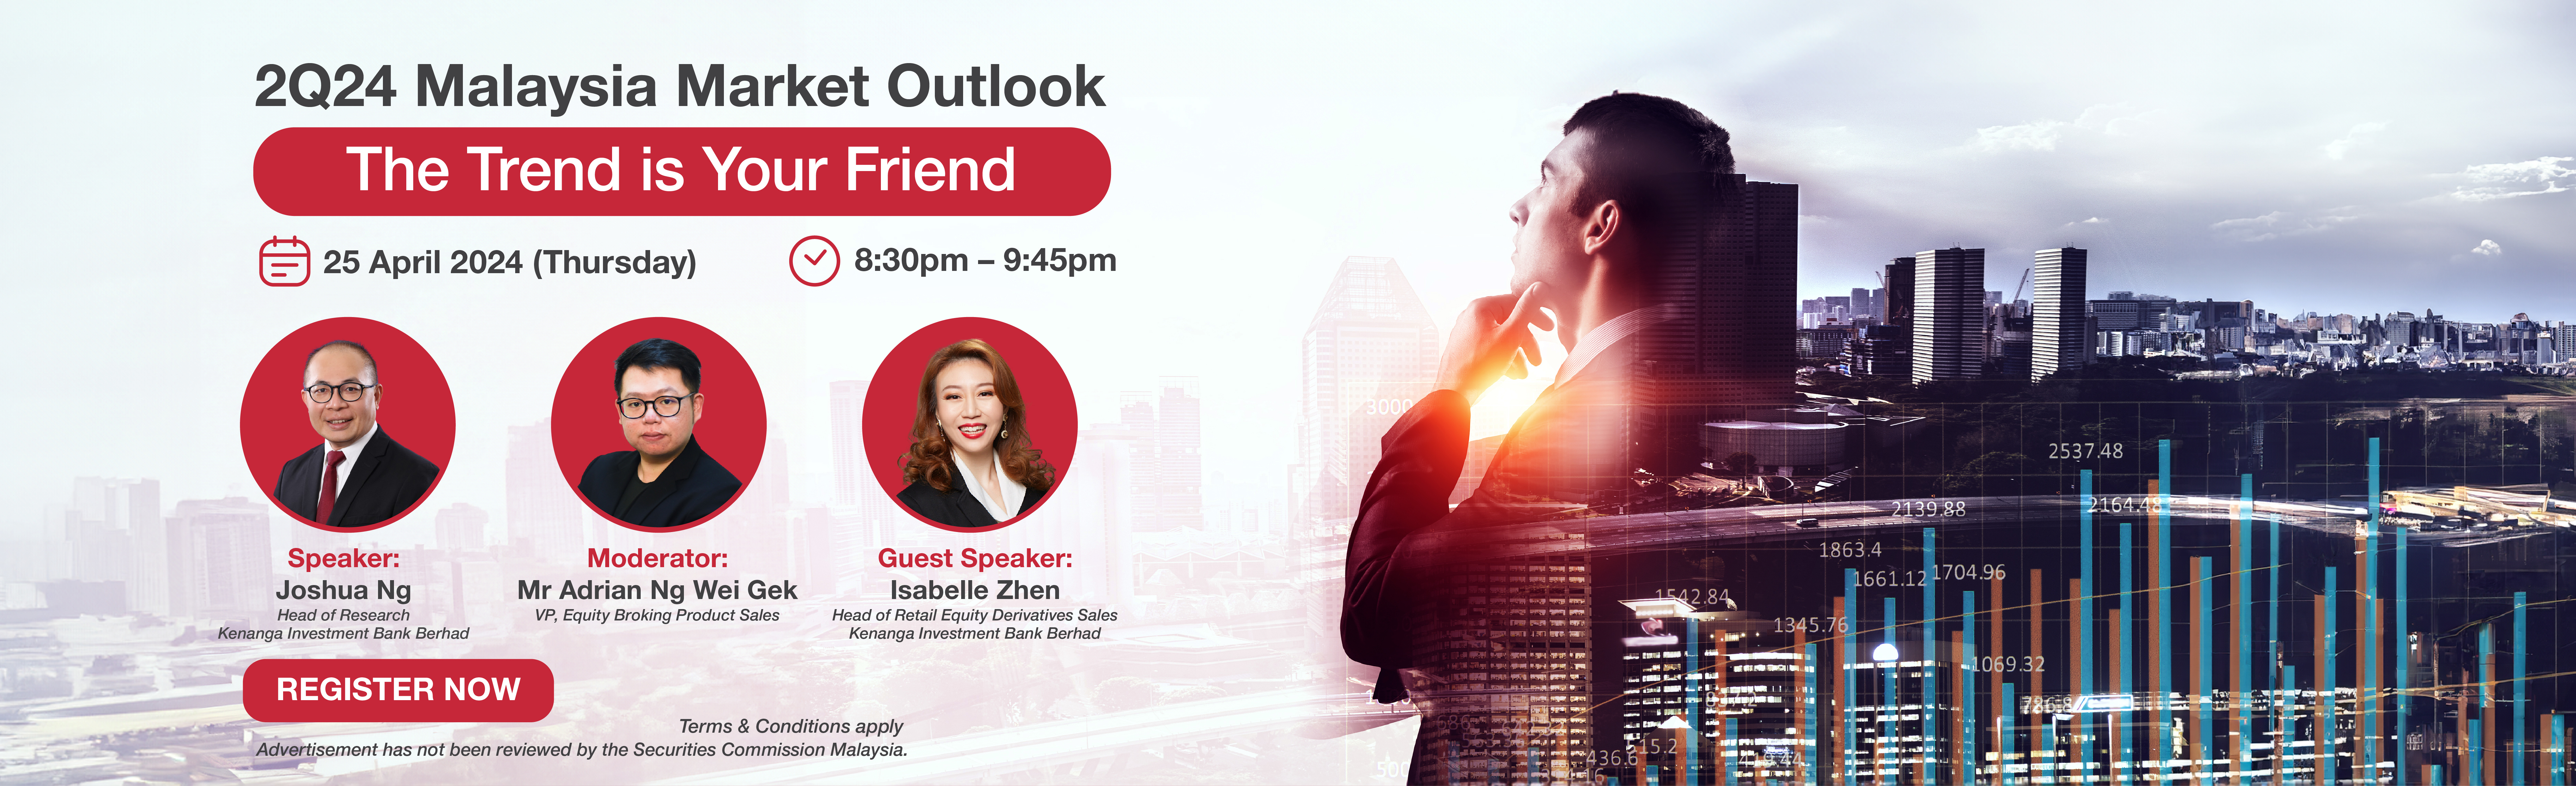 2Q24 Malaysia Market Outlook: The Trend is Your Friend